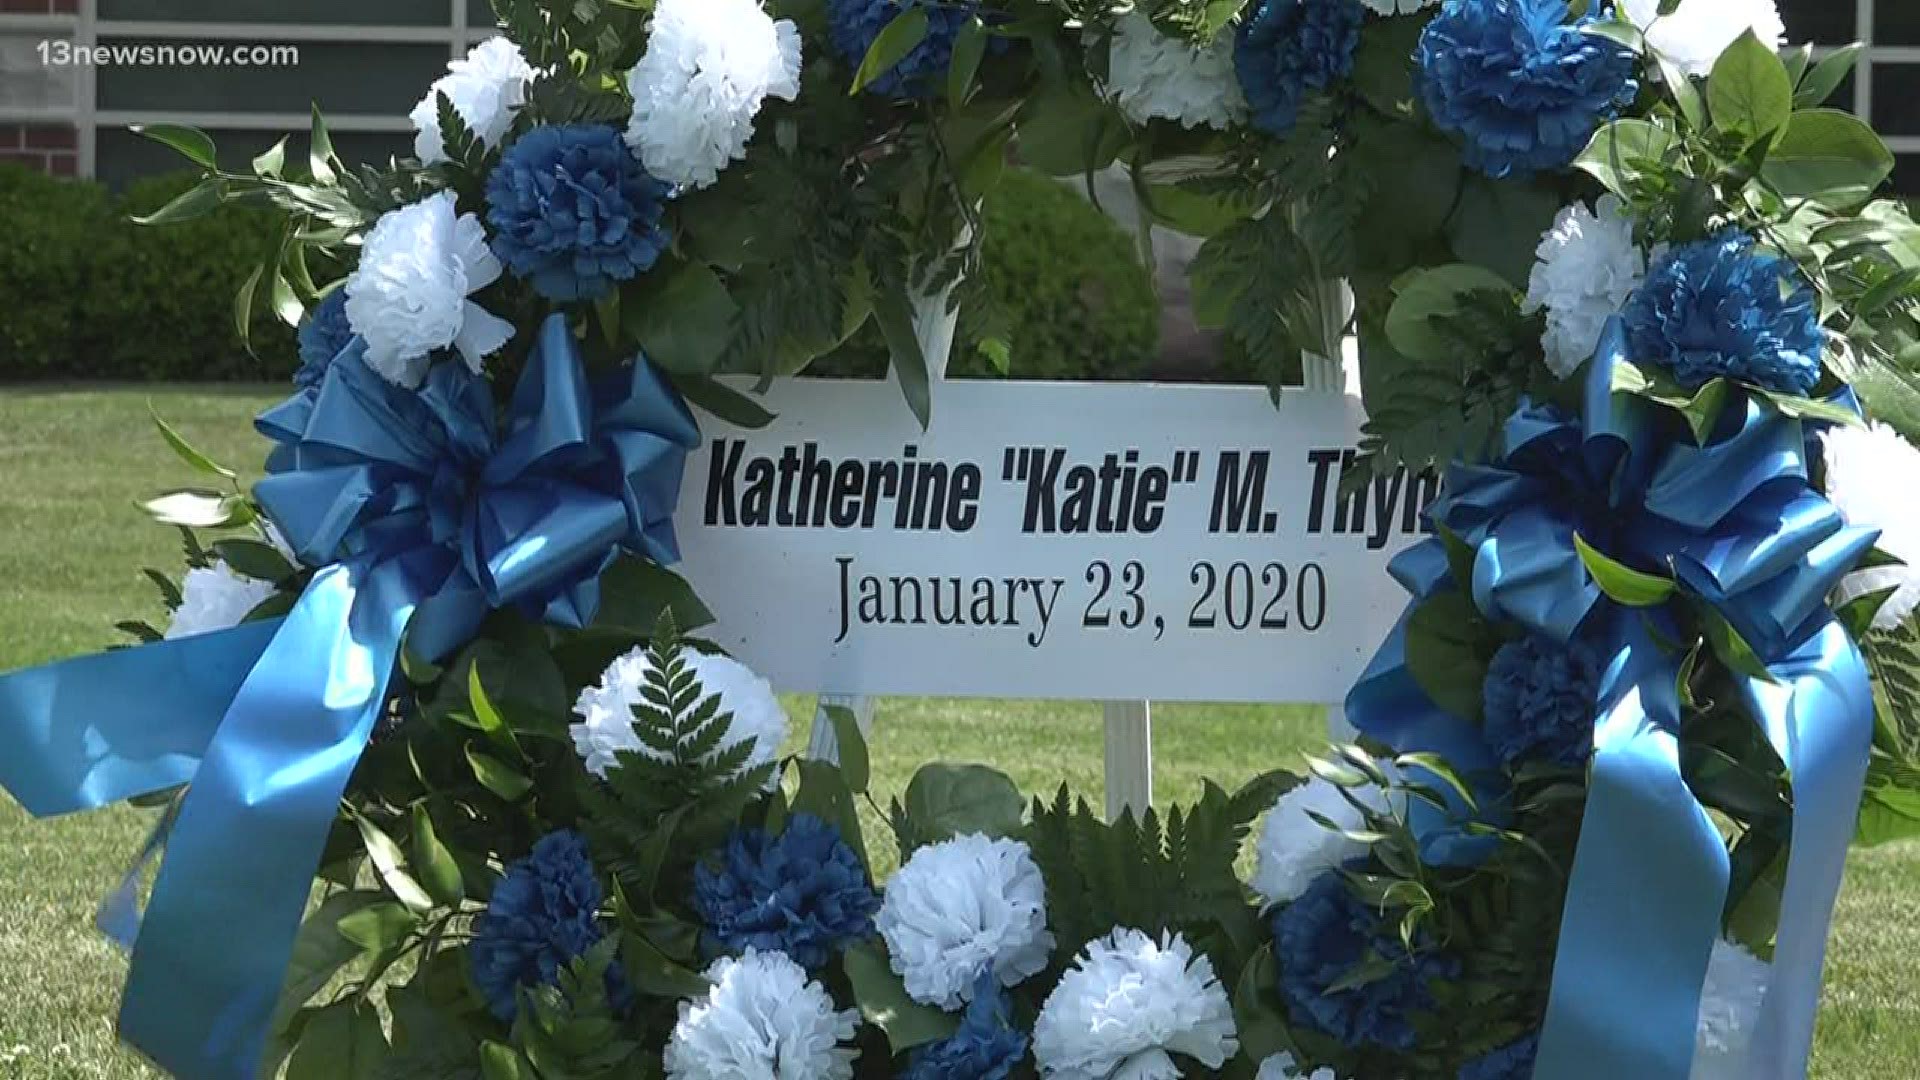 They paid special attention to remembering Officer Katie Thyne this year. Newport News Police Chief Steve Drew said he hopes to hold a larger service when it's safe.